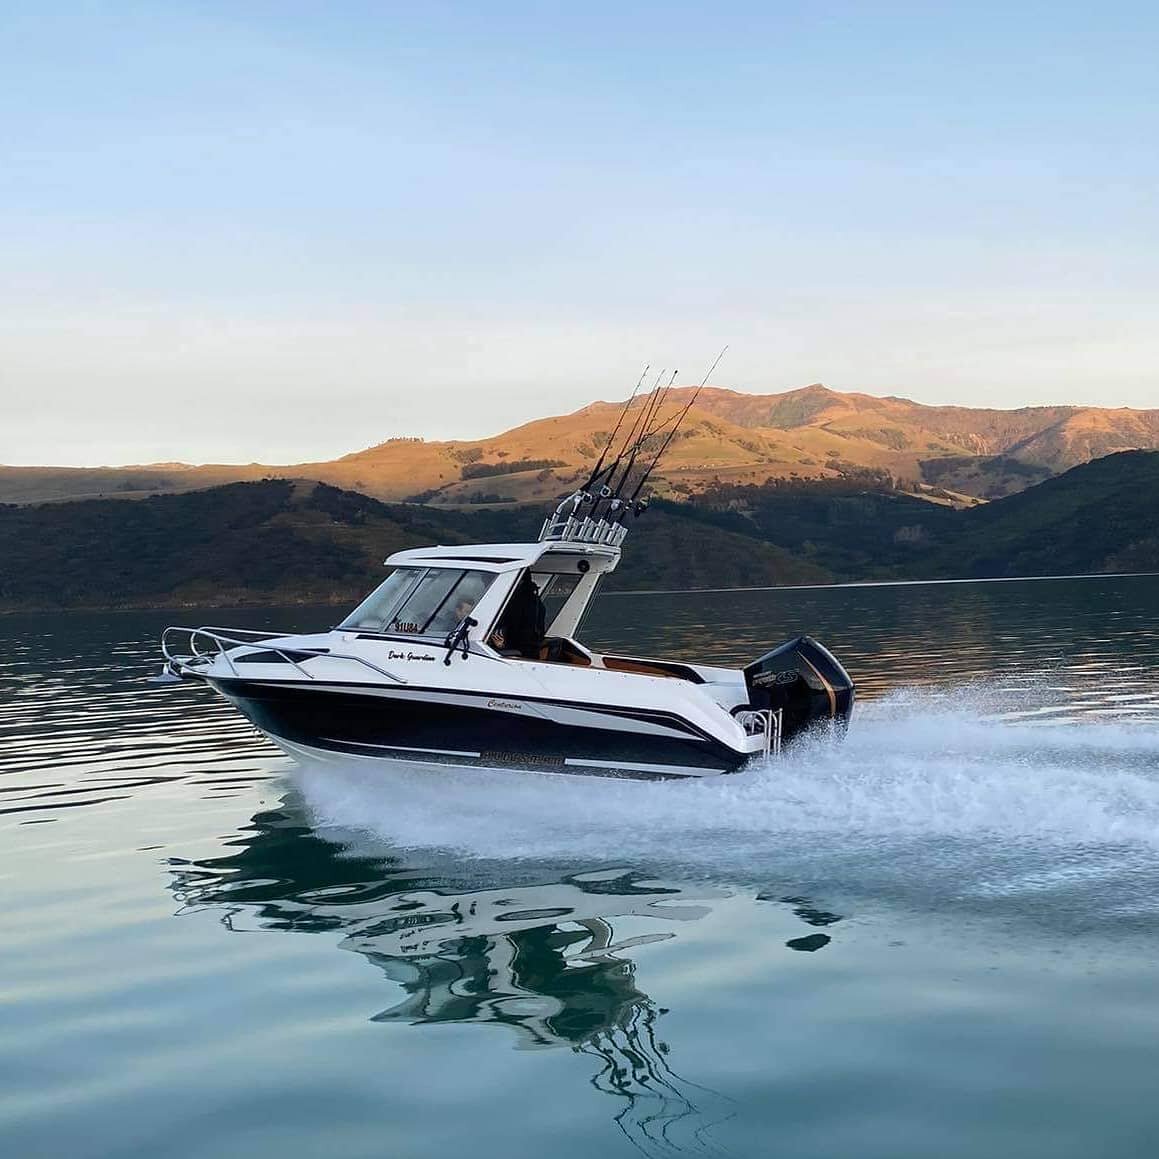 Our Centurion Hardtop is 6.5 metres of absolute comfort and style. Stay warm and dry cruising to your favorite fishing spot and enjoy the soft, safe ride if conditions get tough 💪

This is boating how it should be!

www.huntsmanboats.co.nz
#huntsman